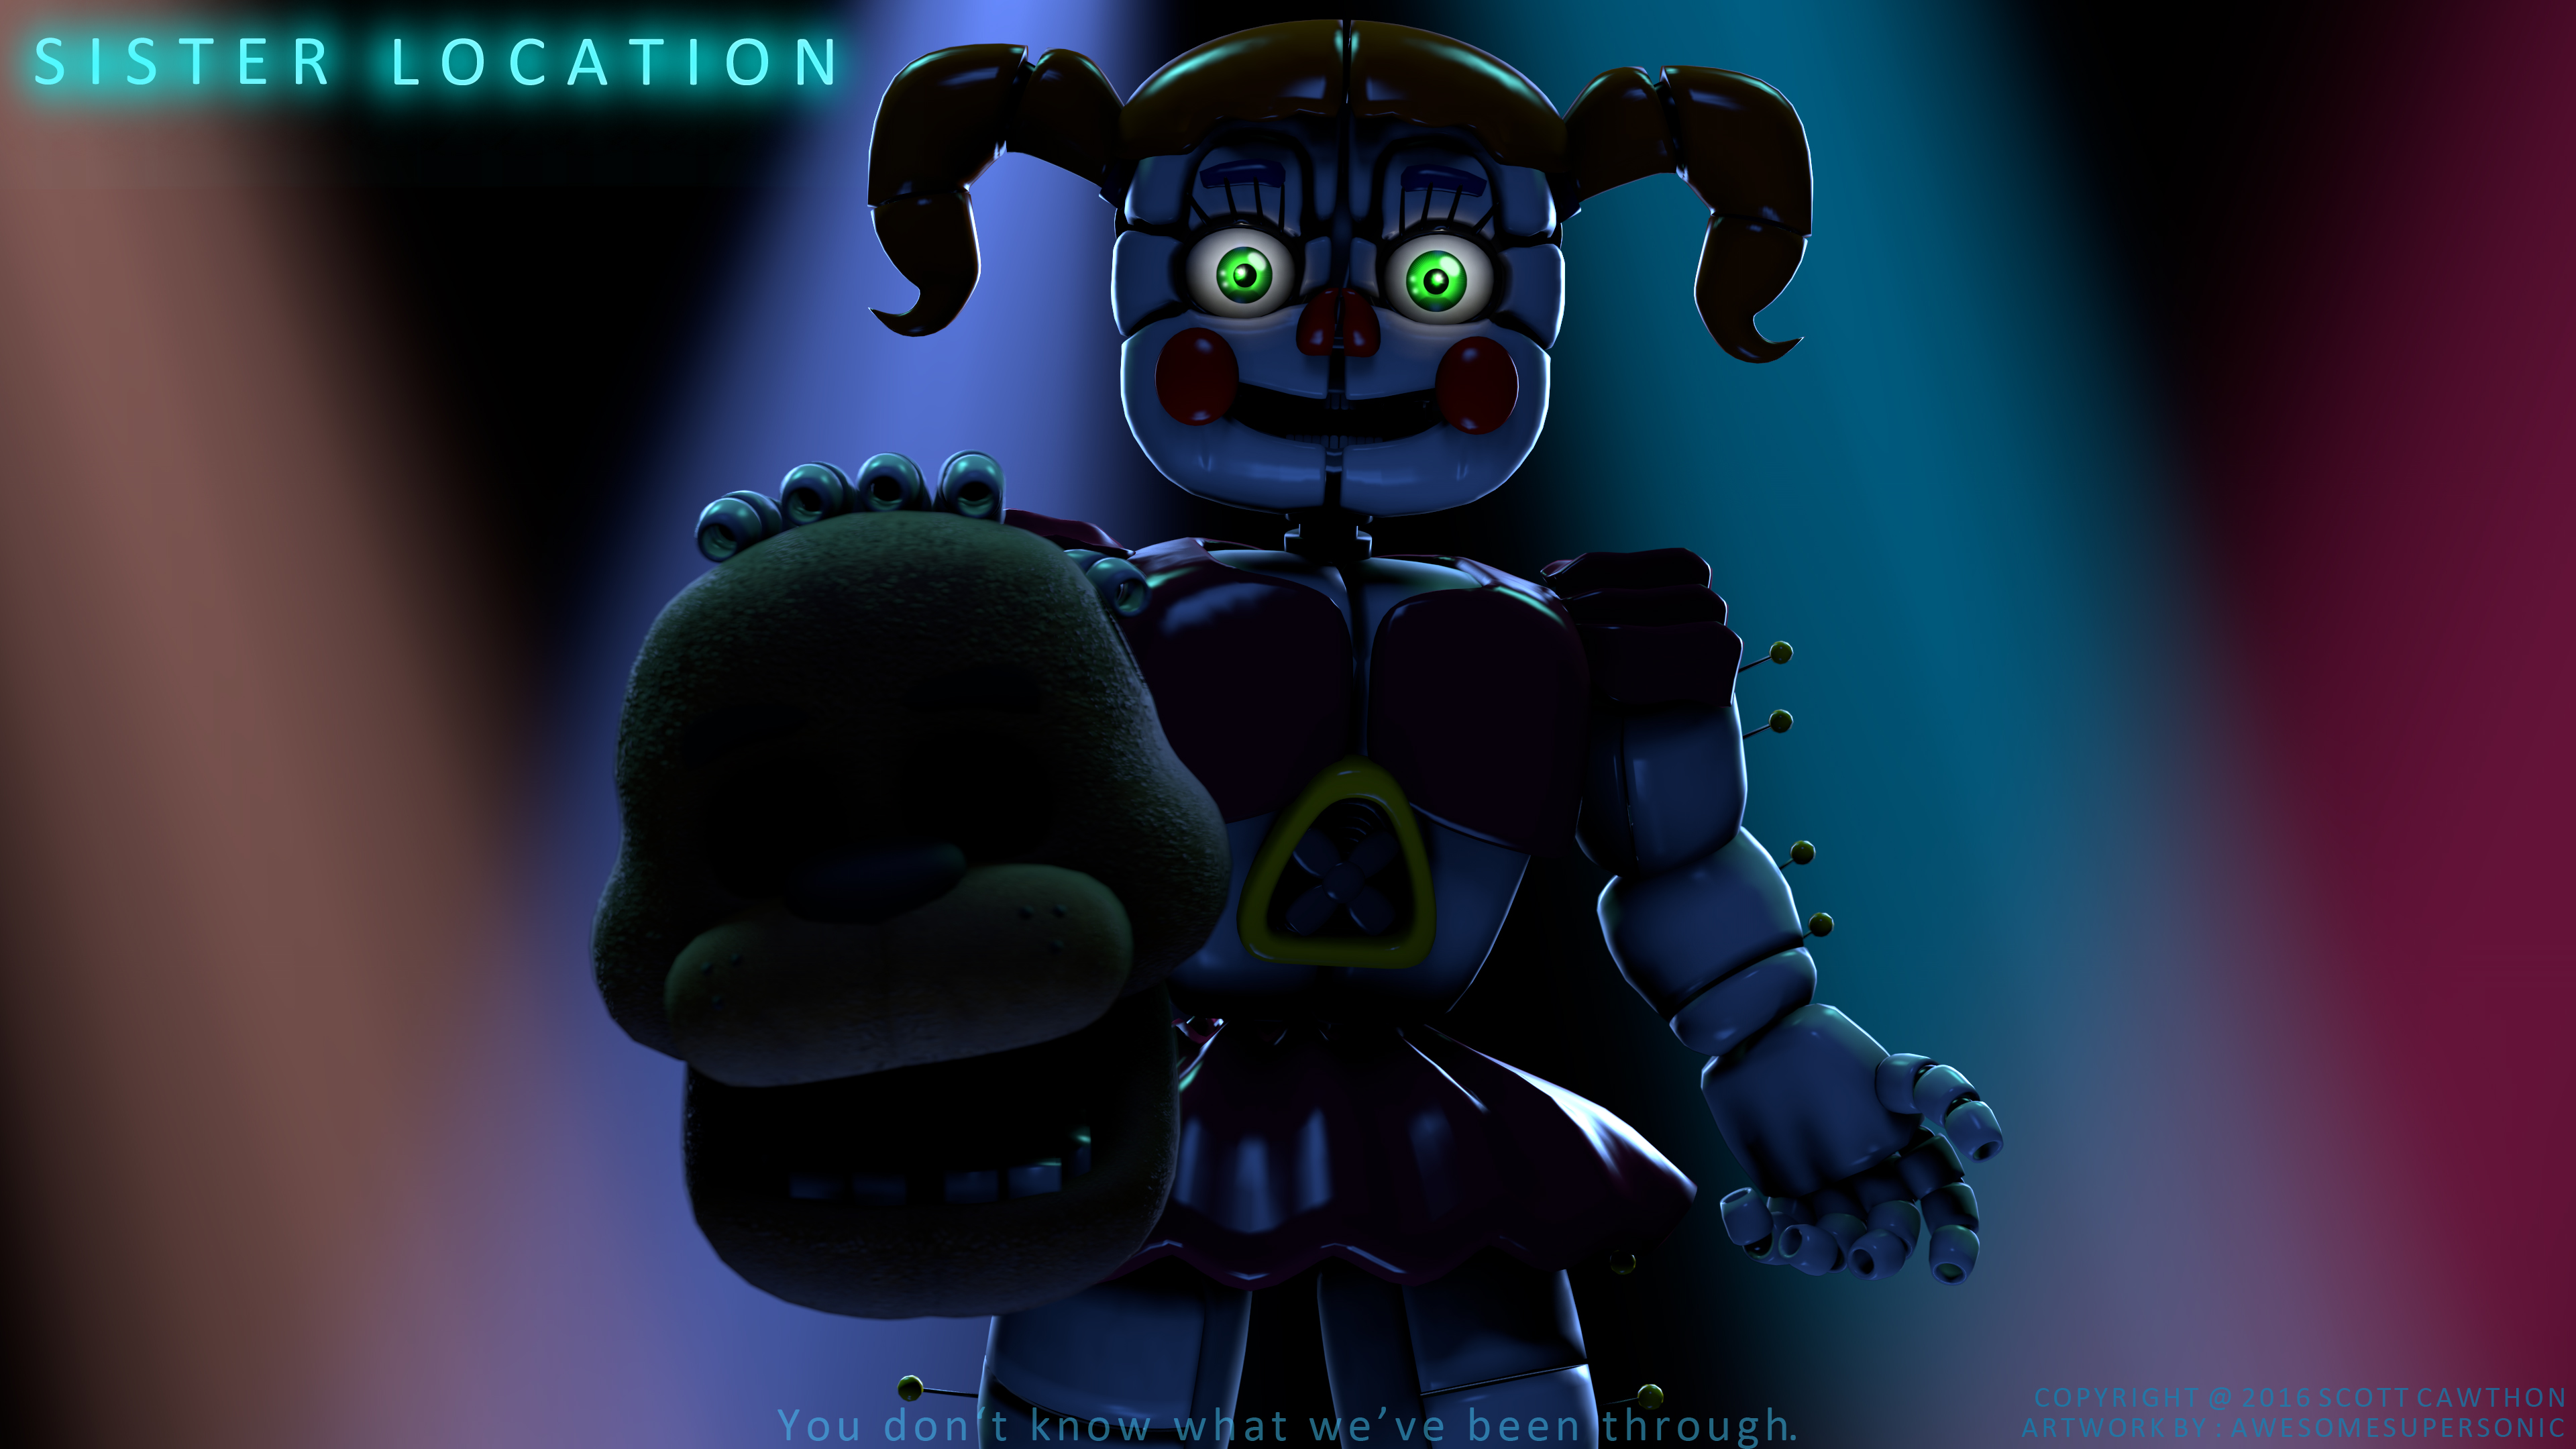 How well do you know FNaF - TriviaCreator